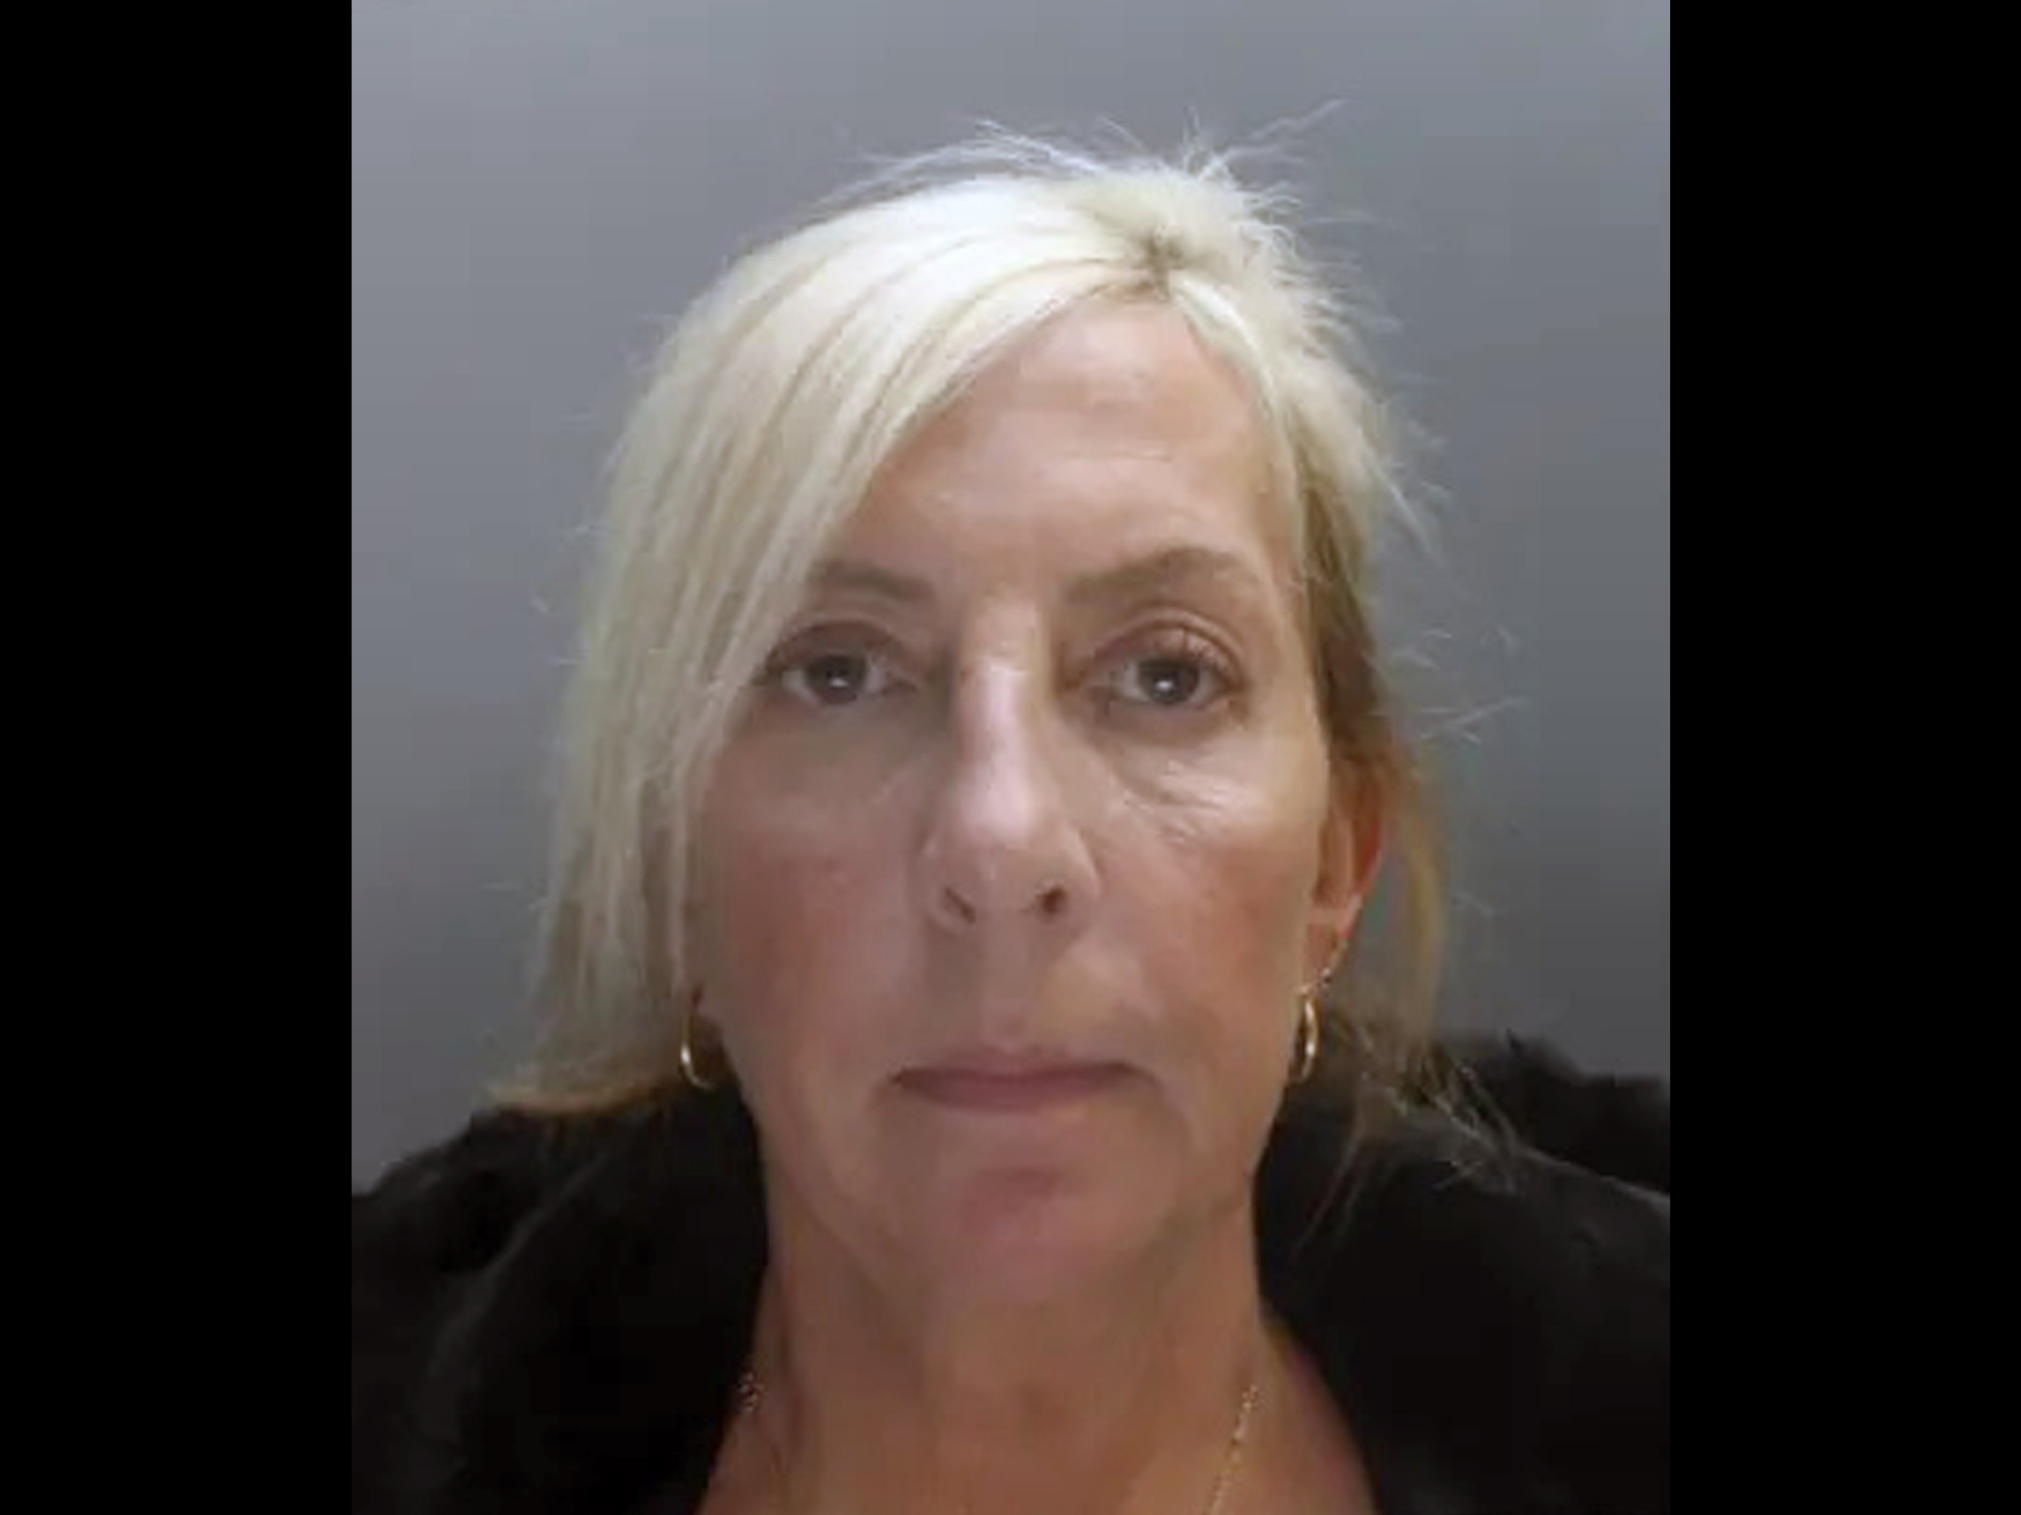 Care worker Tracey Burrows, pictured, was convicted of gross negligence manslaughter after she left a disabled woman to starve